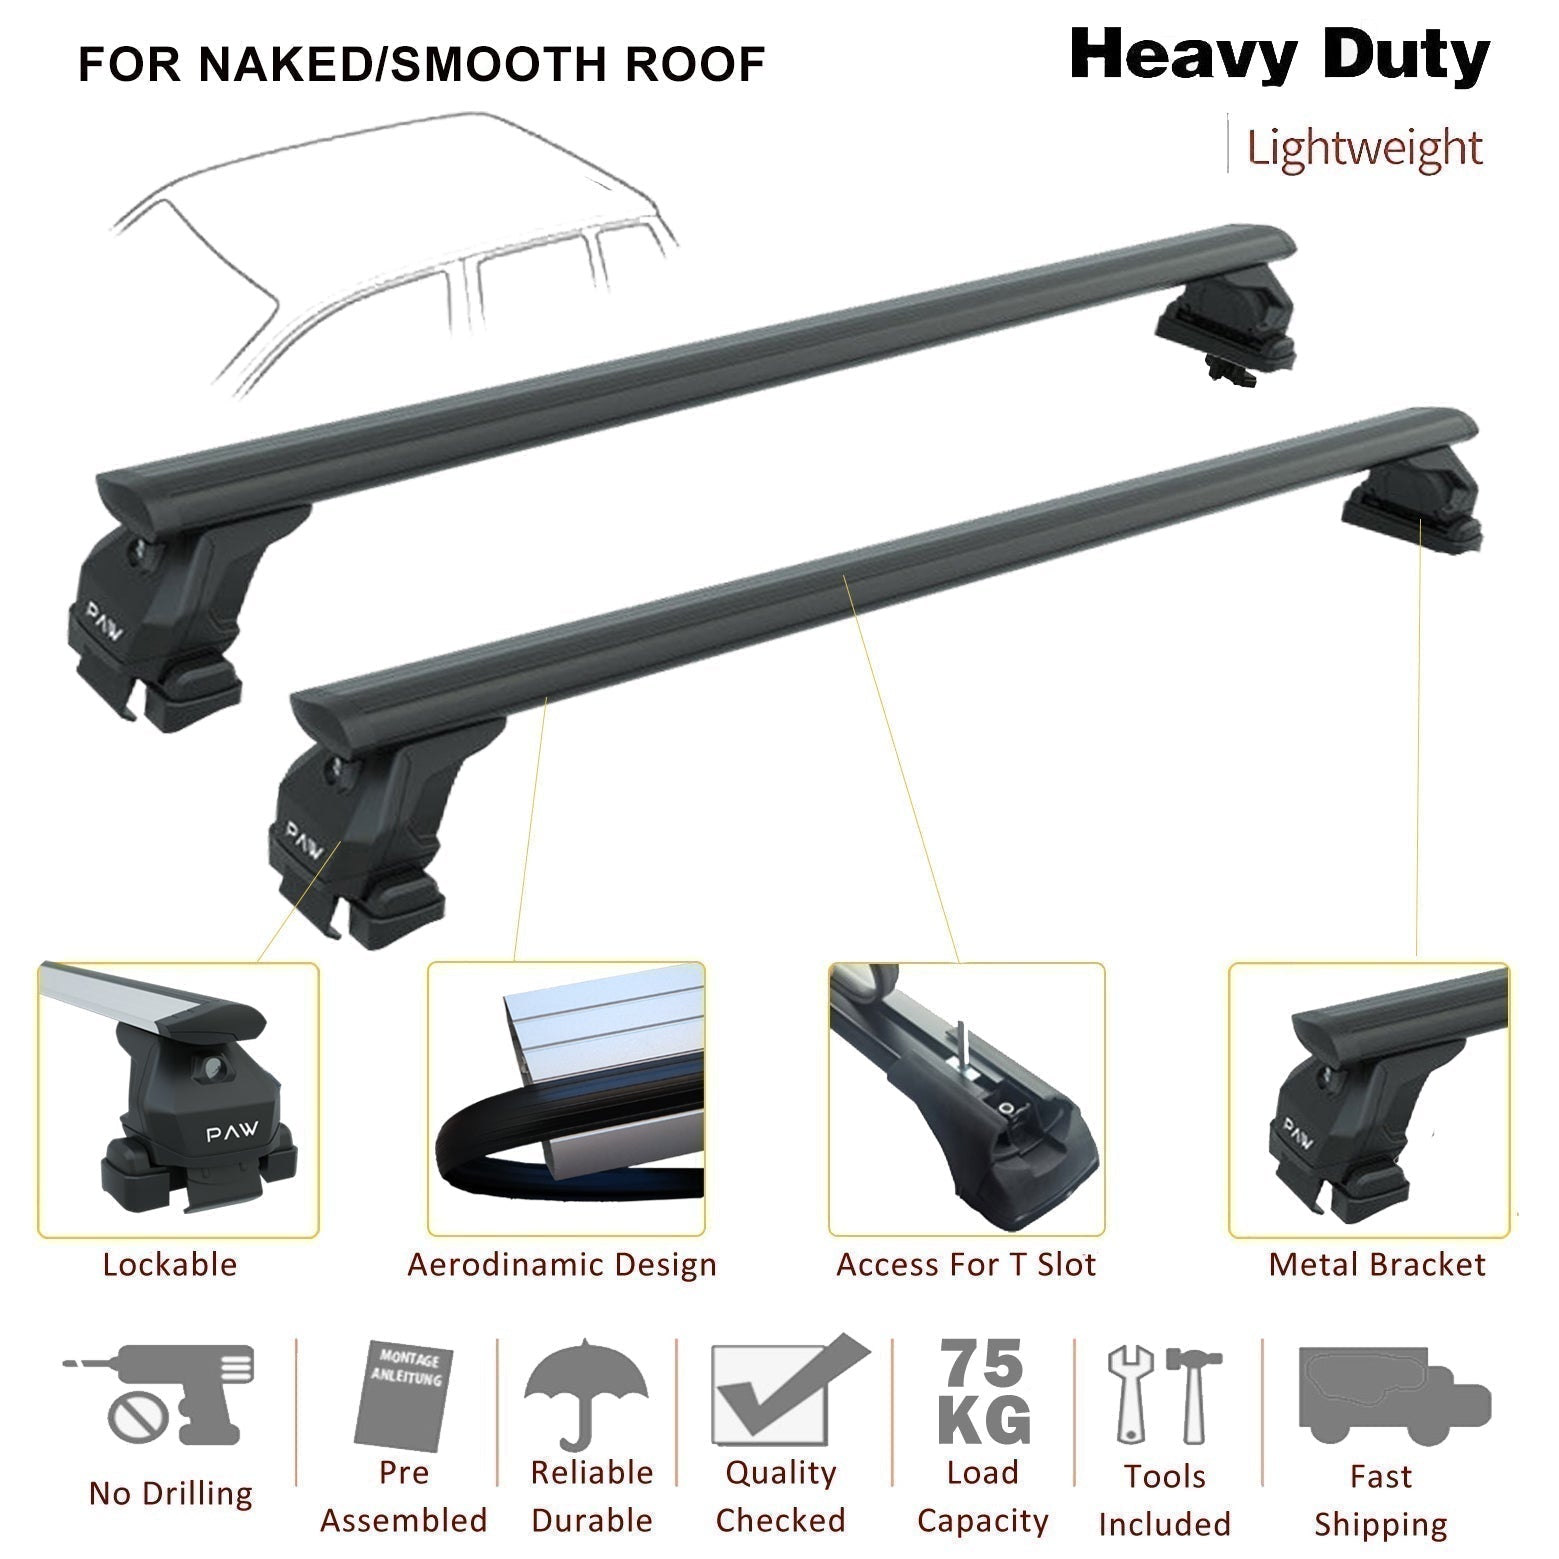 For Renault Grand Scenic 2016-Up Roof Rack System, Aluminium Cross Bar, Metal Bracket, Normal Roof, Silver